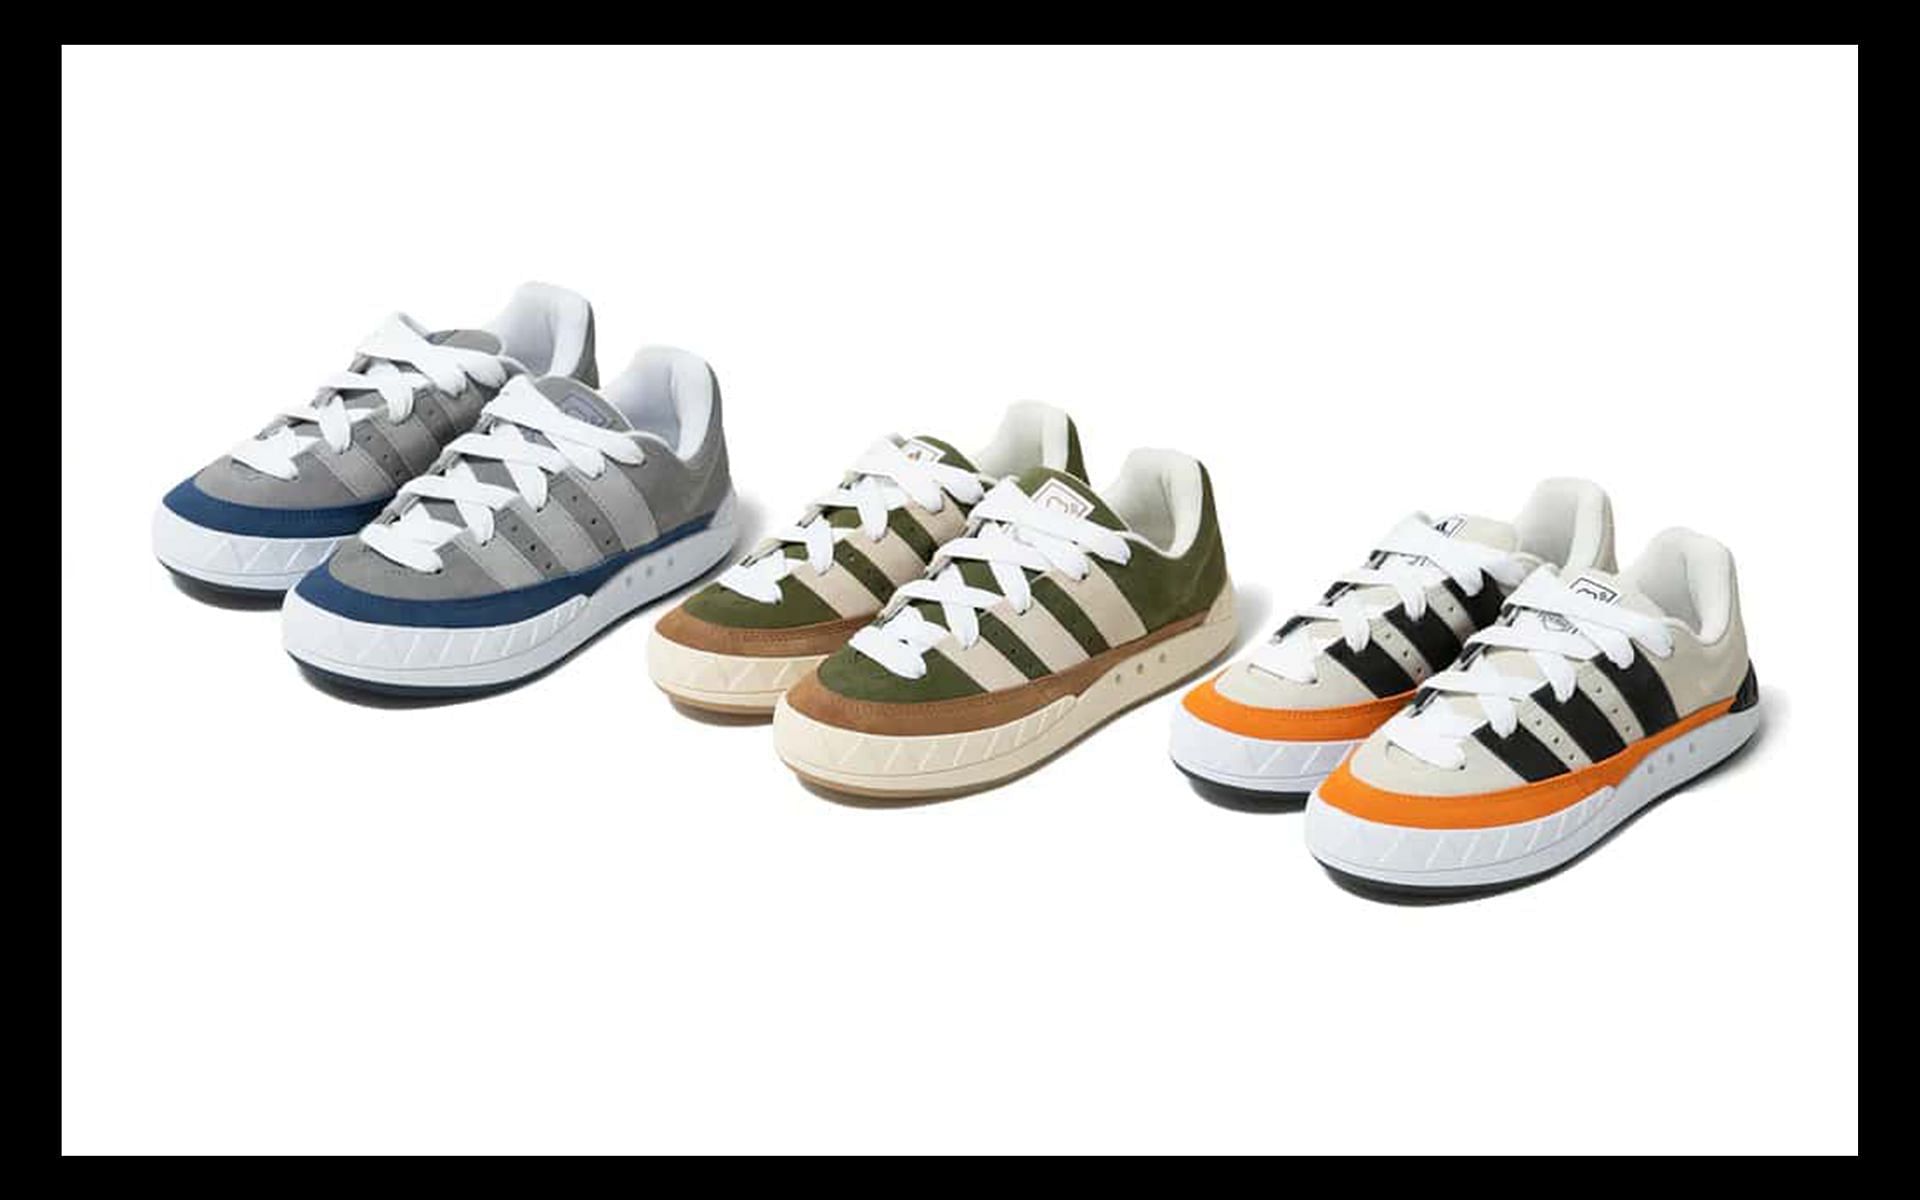 Newly released Adidas Originals x Human Made ADIMATIC HM sneakers, for the Teenagers (Image via Human Made)